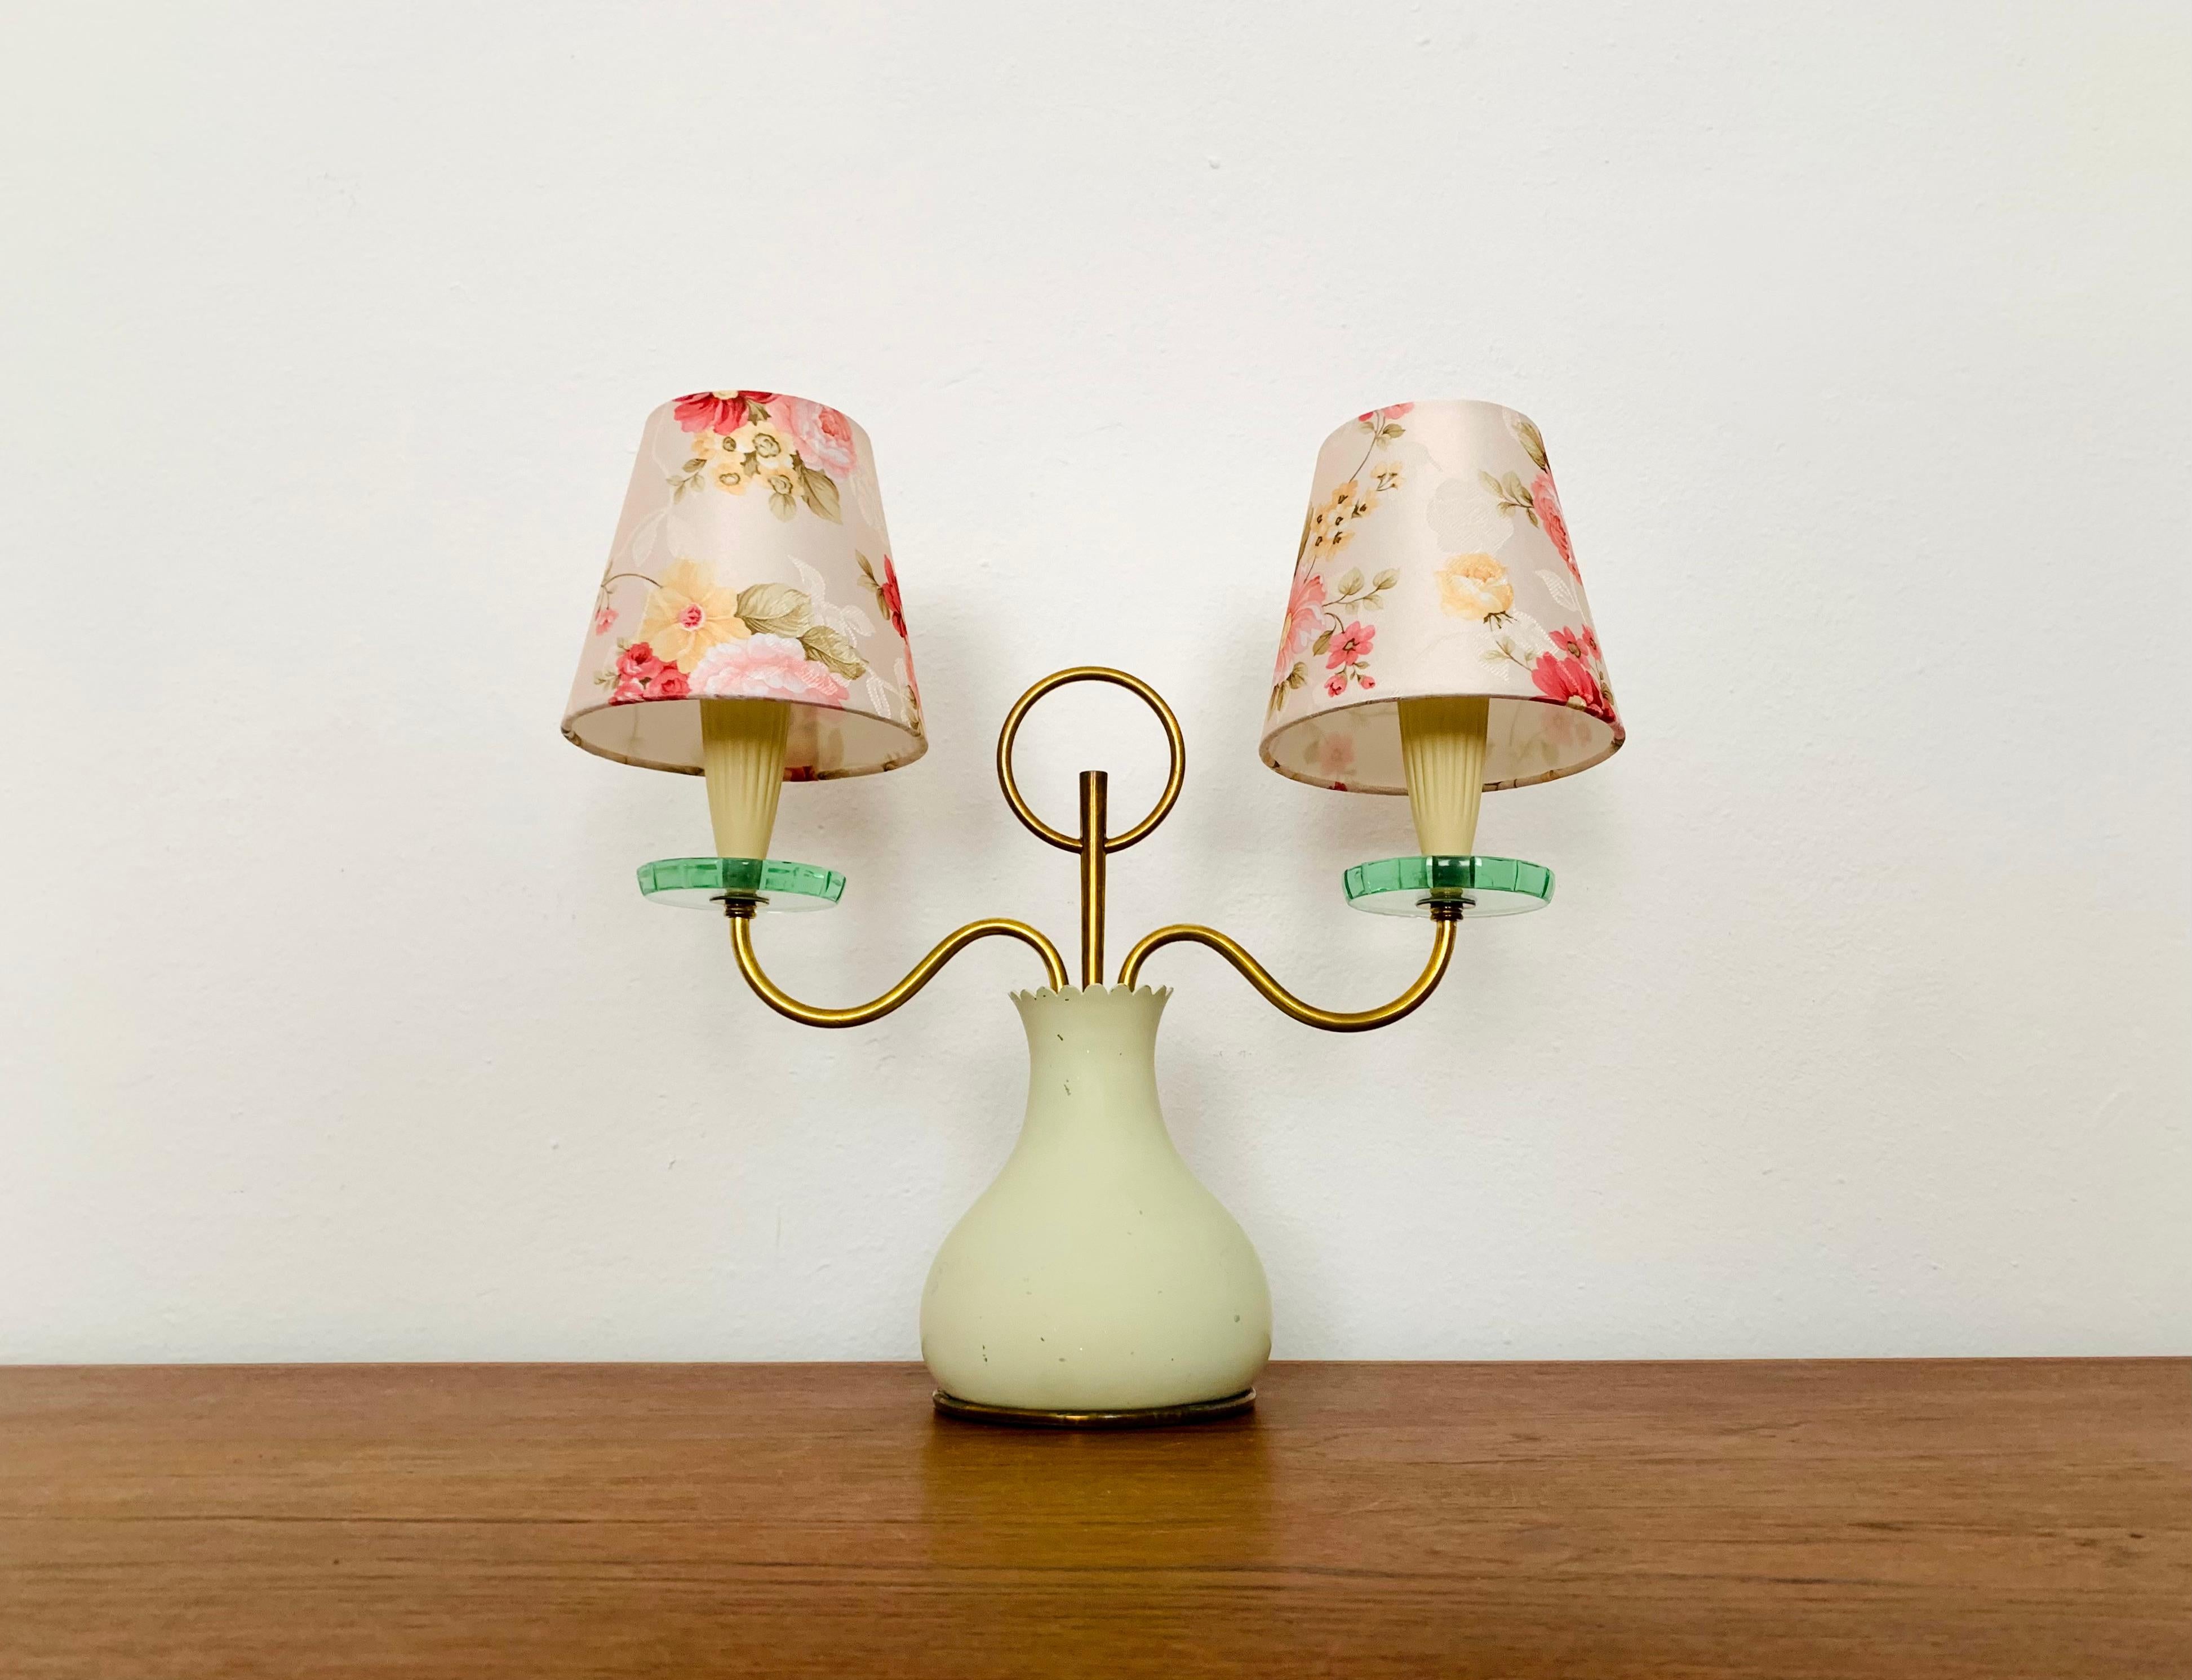 Exceptionally decorative Italian table lamp from the 1950s.
Loving details and an enrichment for every home.
A cozy light is created.

Condition:

Good vintage condition with slight signs of wear consistent with age.
The metal parts are beautifully